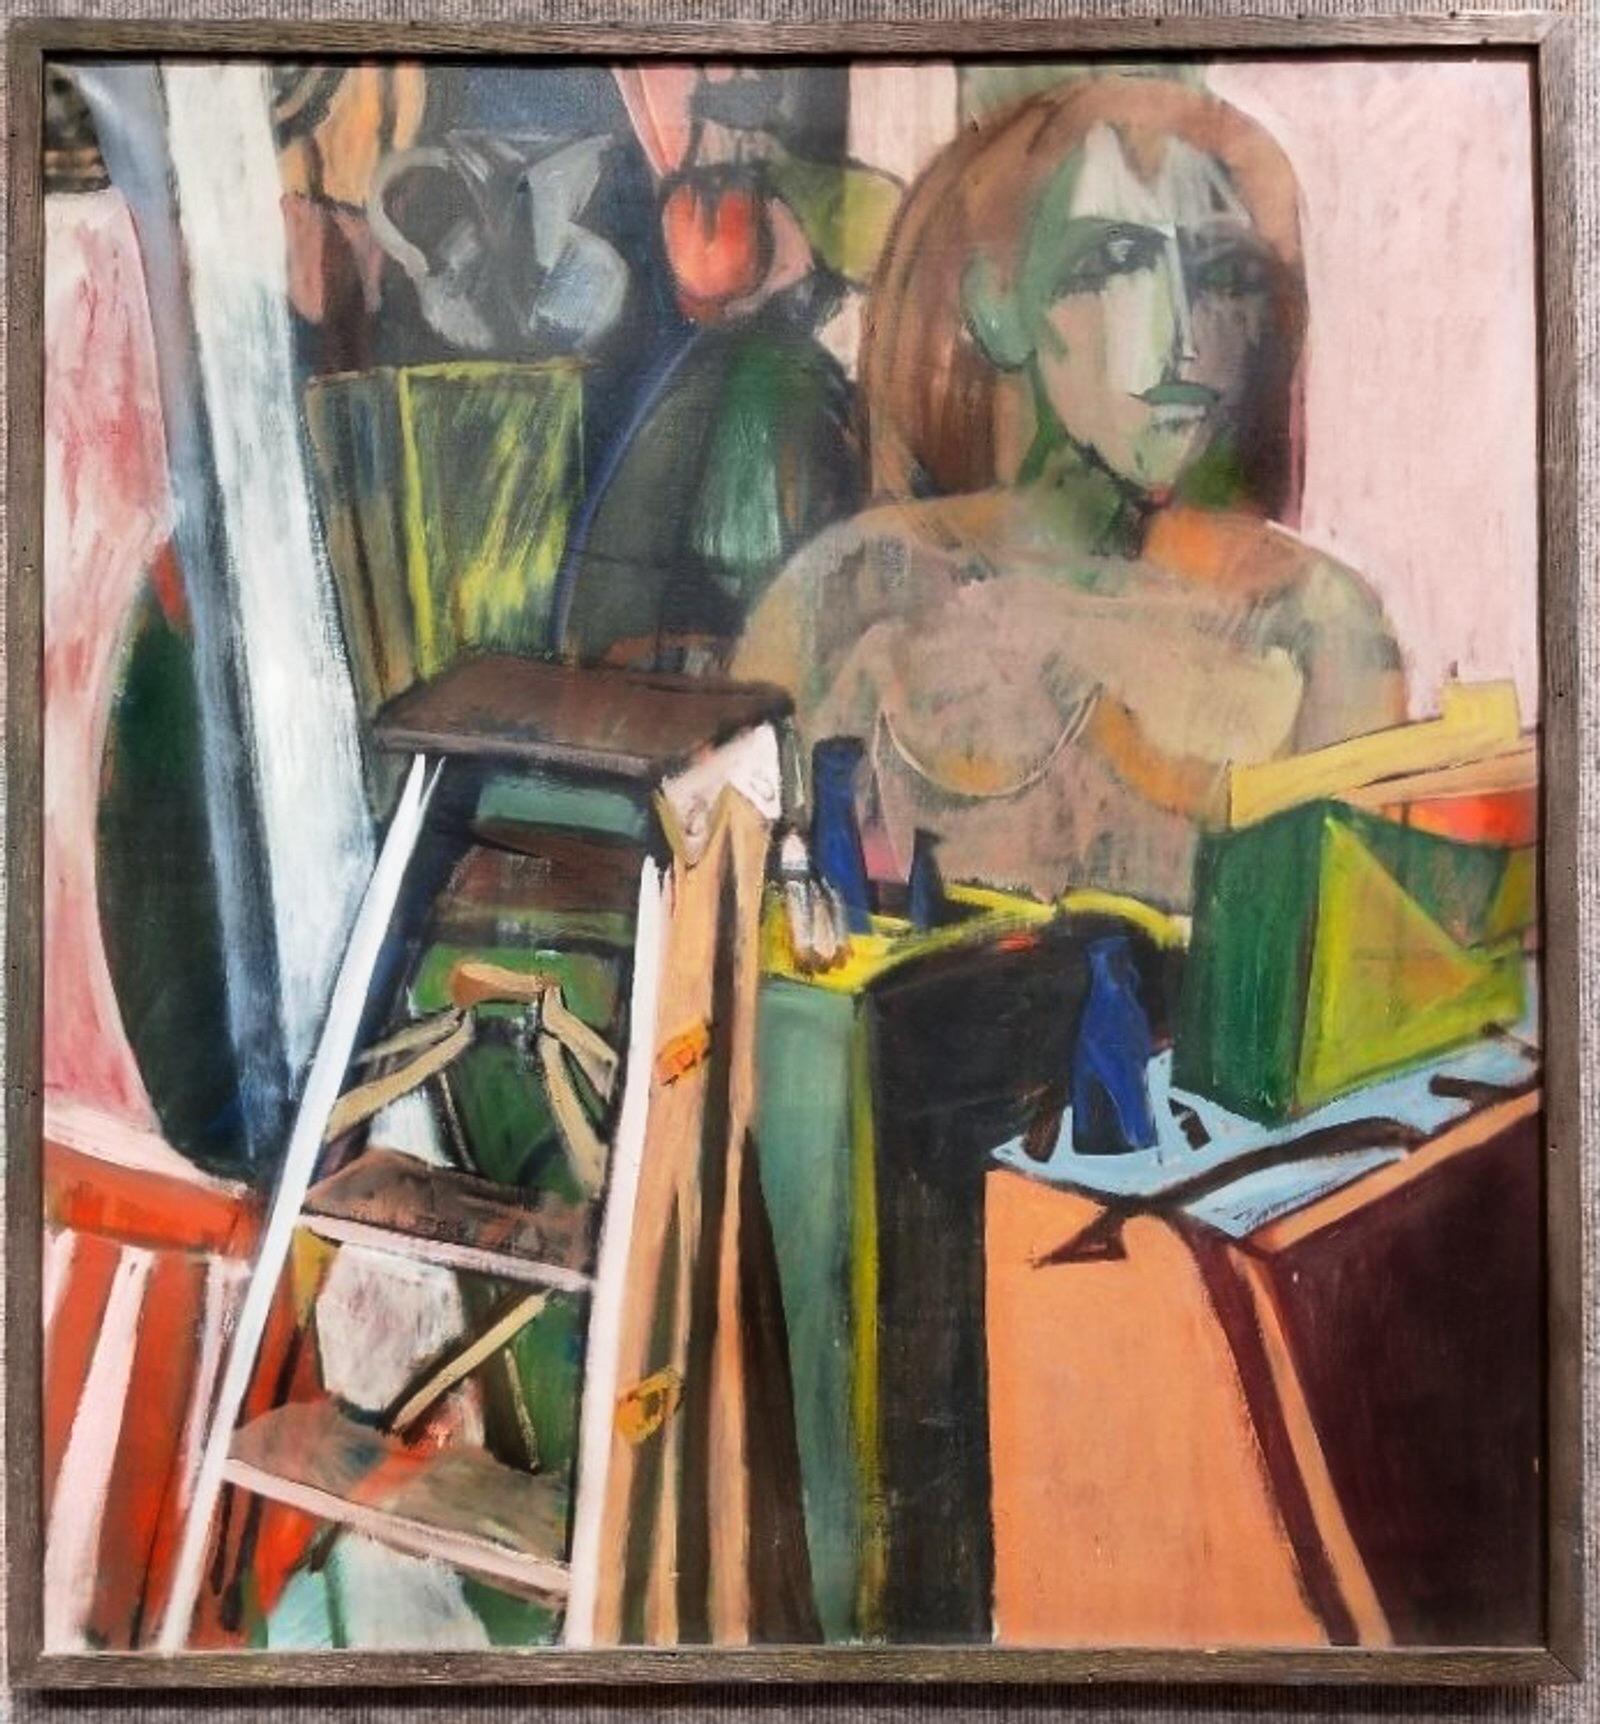 Mid-century Cubist still-life with ladder, oil on canvas, Martin Lubner, circa 1959
Painting still life by Martin Lubner. Painting: 32.5